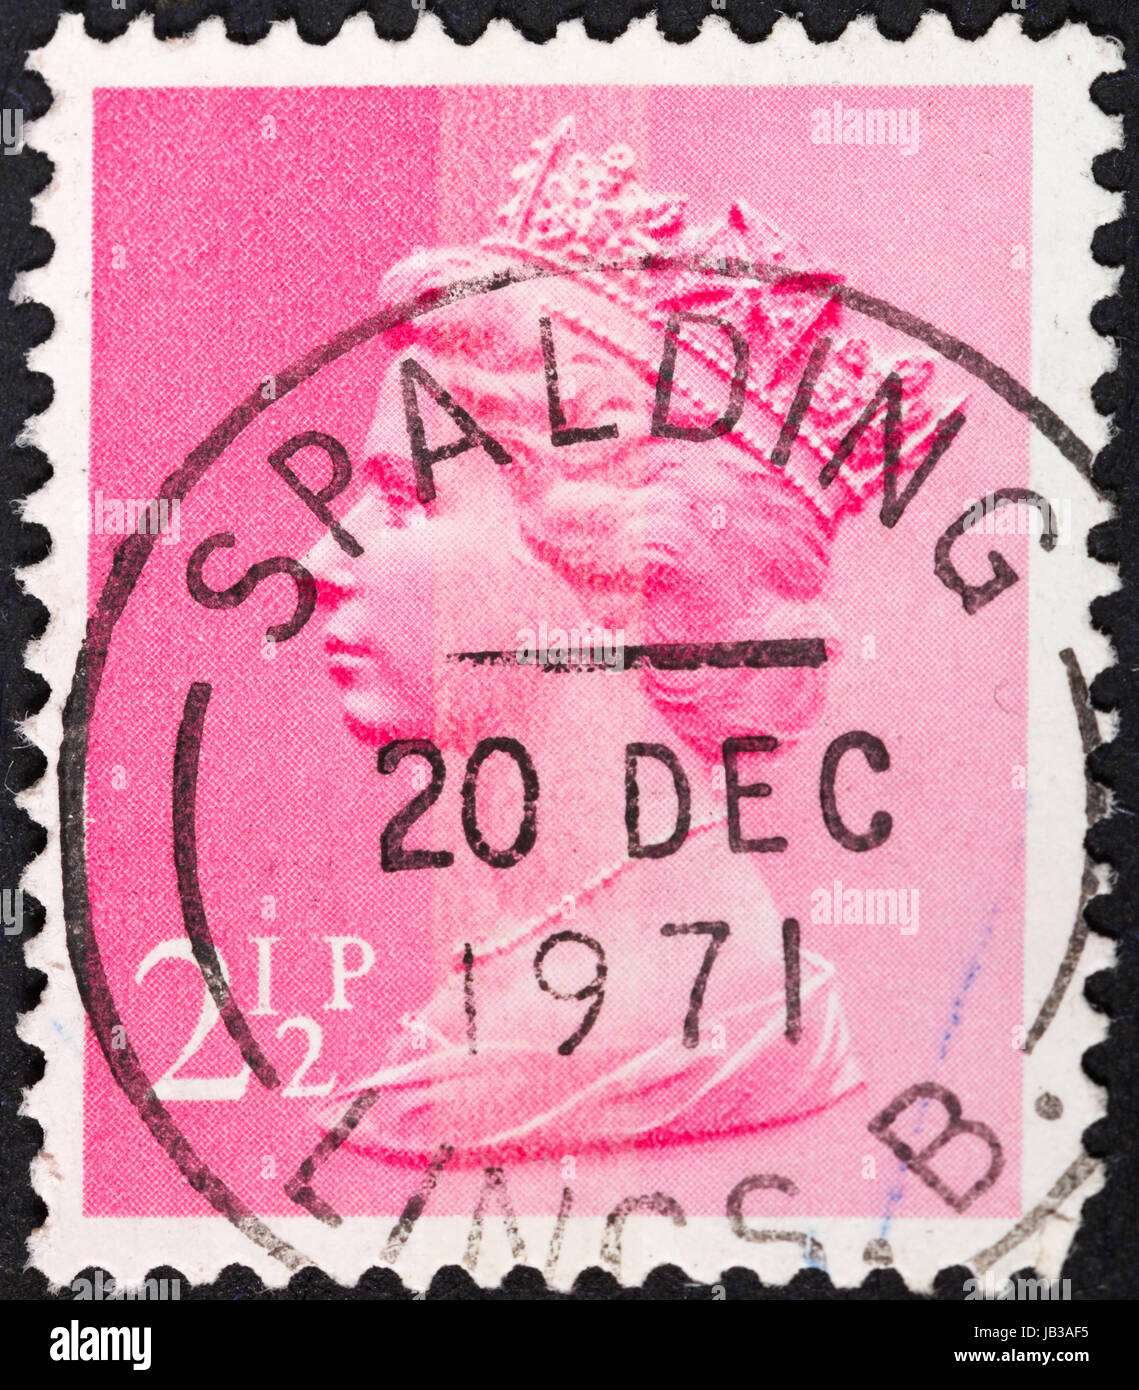 UNITED KINGDOM - CIRCA 1972: A postage stamp printed in the United Kingdom shows Queen Elizabeth on pink, circa 1972 Stock Photo